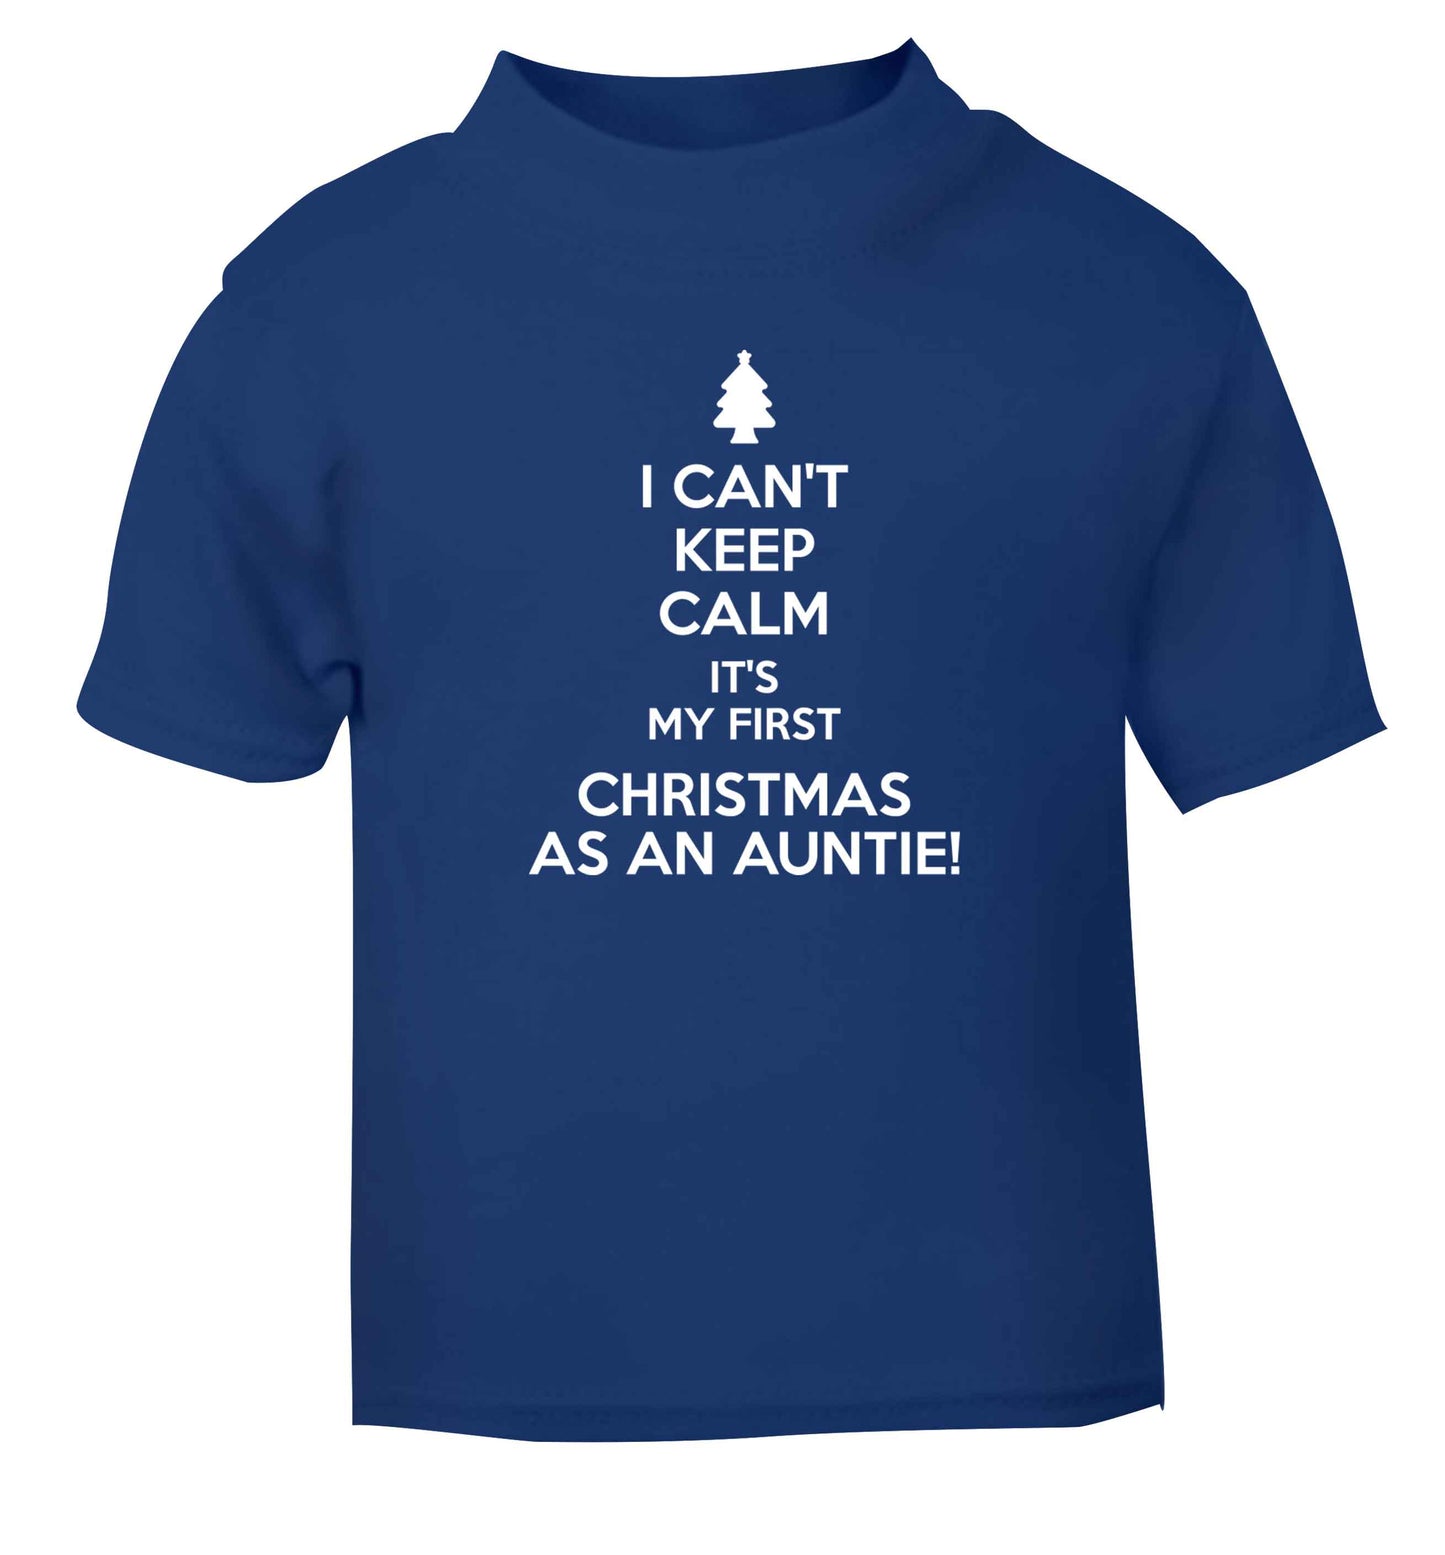 I can't keep calm it's my first Christmas as an auntie! blue Baby Toddler Tshirt 2 Years